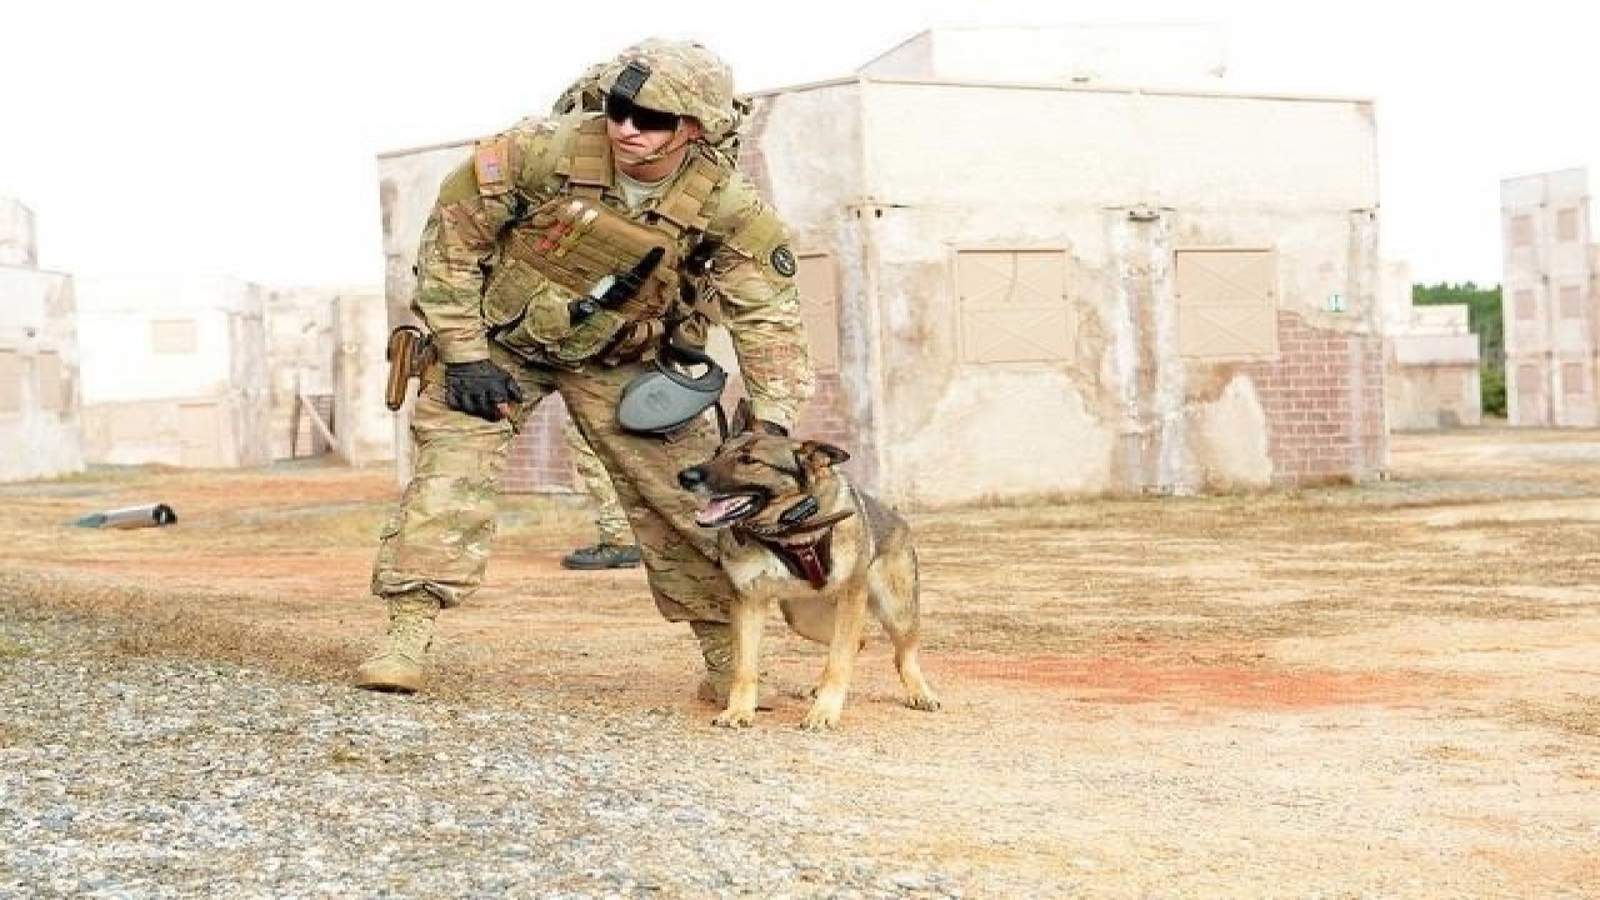 Army sergeant reunites with dog he served with in Iraq after spending two years apart